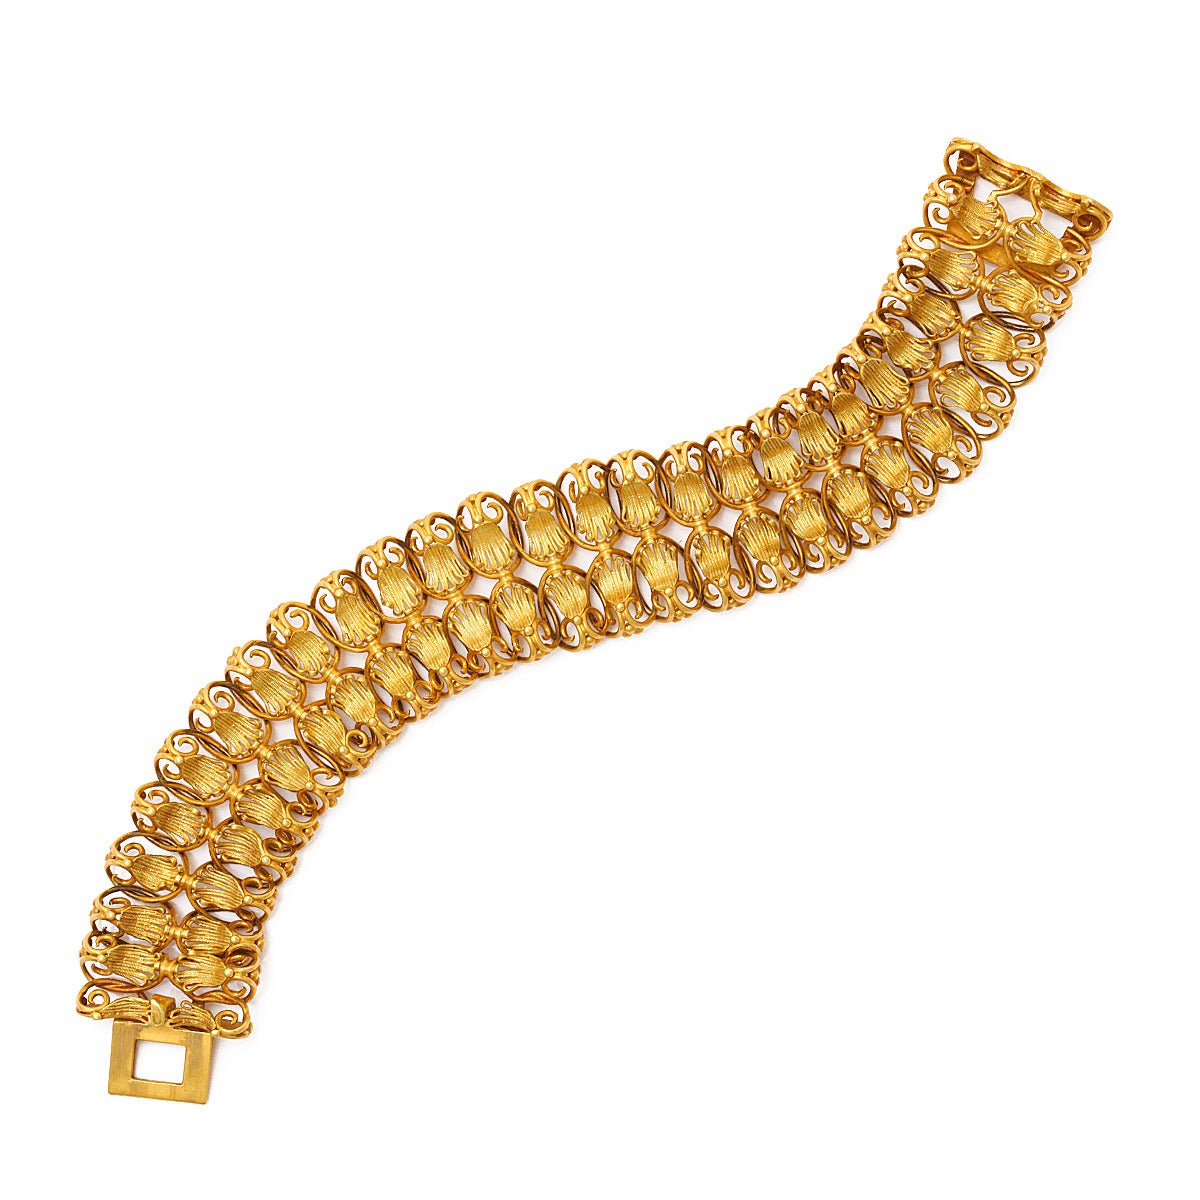 Georgian woven gold bracelet composed of linked, scrolling palmettes. In original case.

English, ca. 1800
Length: 7 3/8 inches